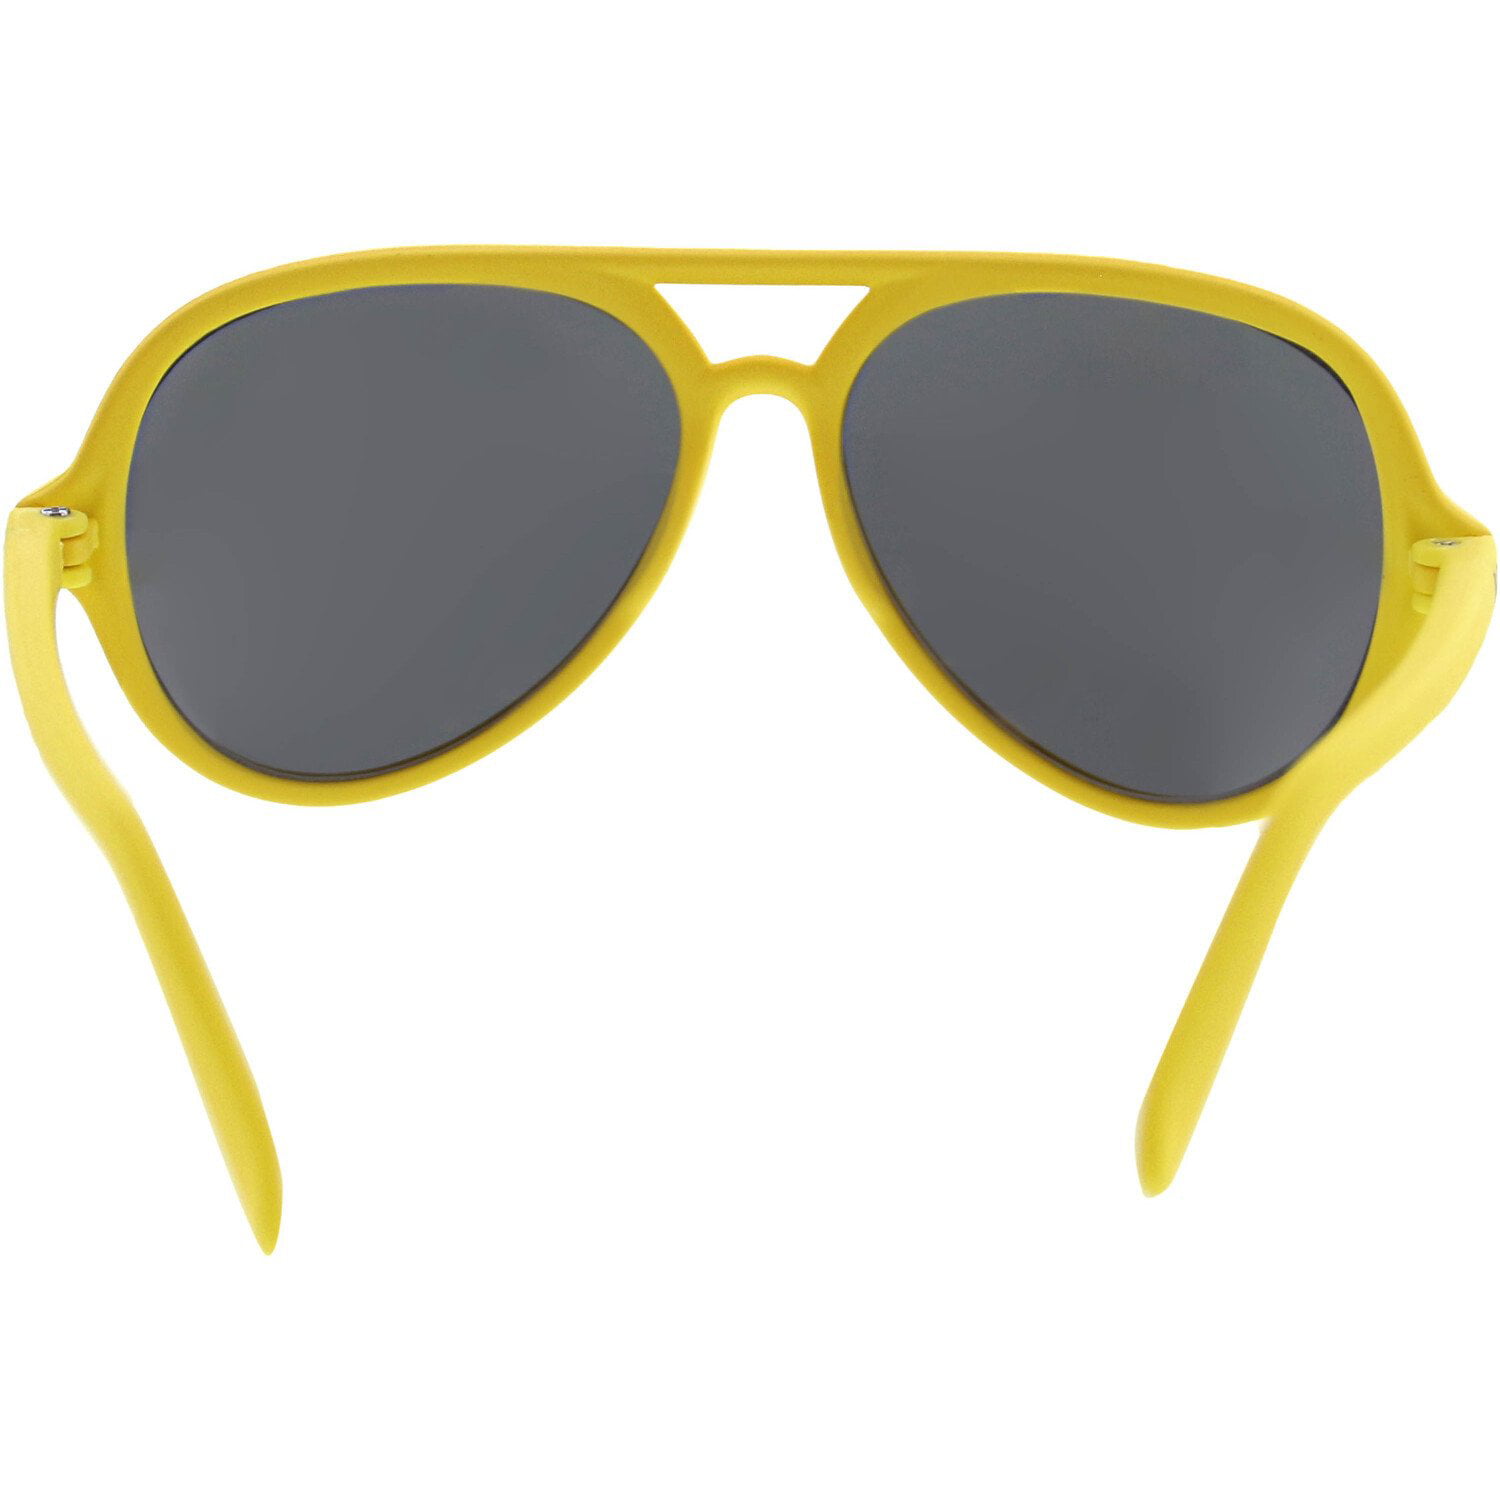 Details about  / Janie And Jack Mirrored Aviator Sunglasses 2-4 Years 200397818 Yellow Oval